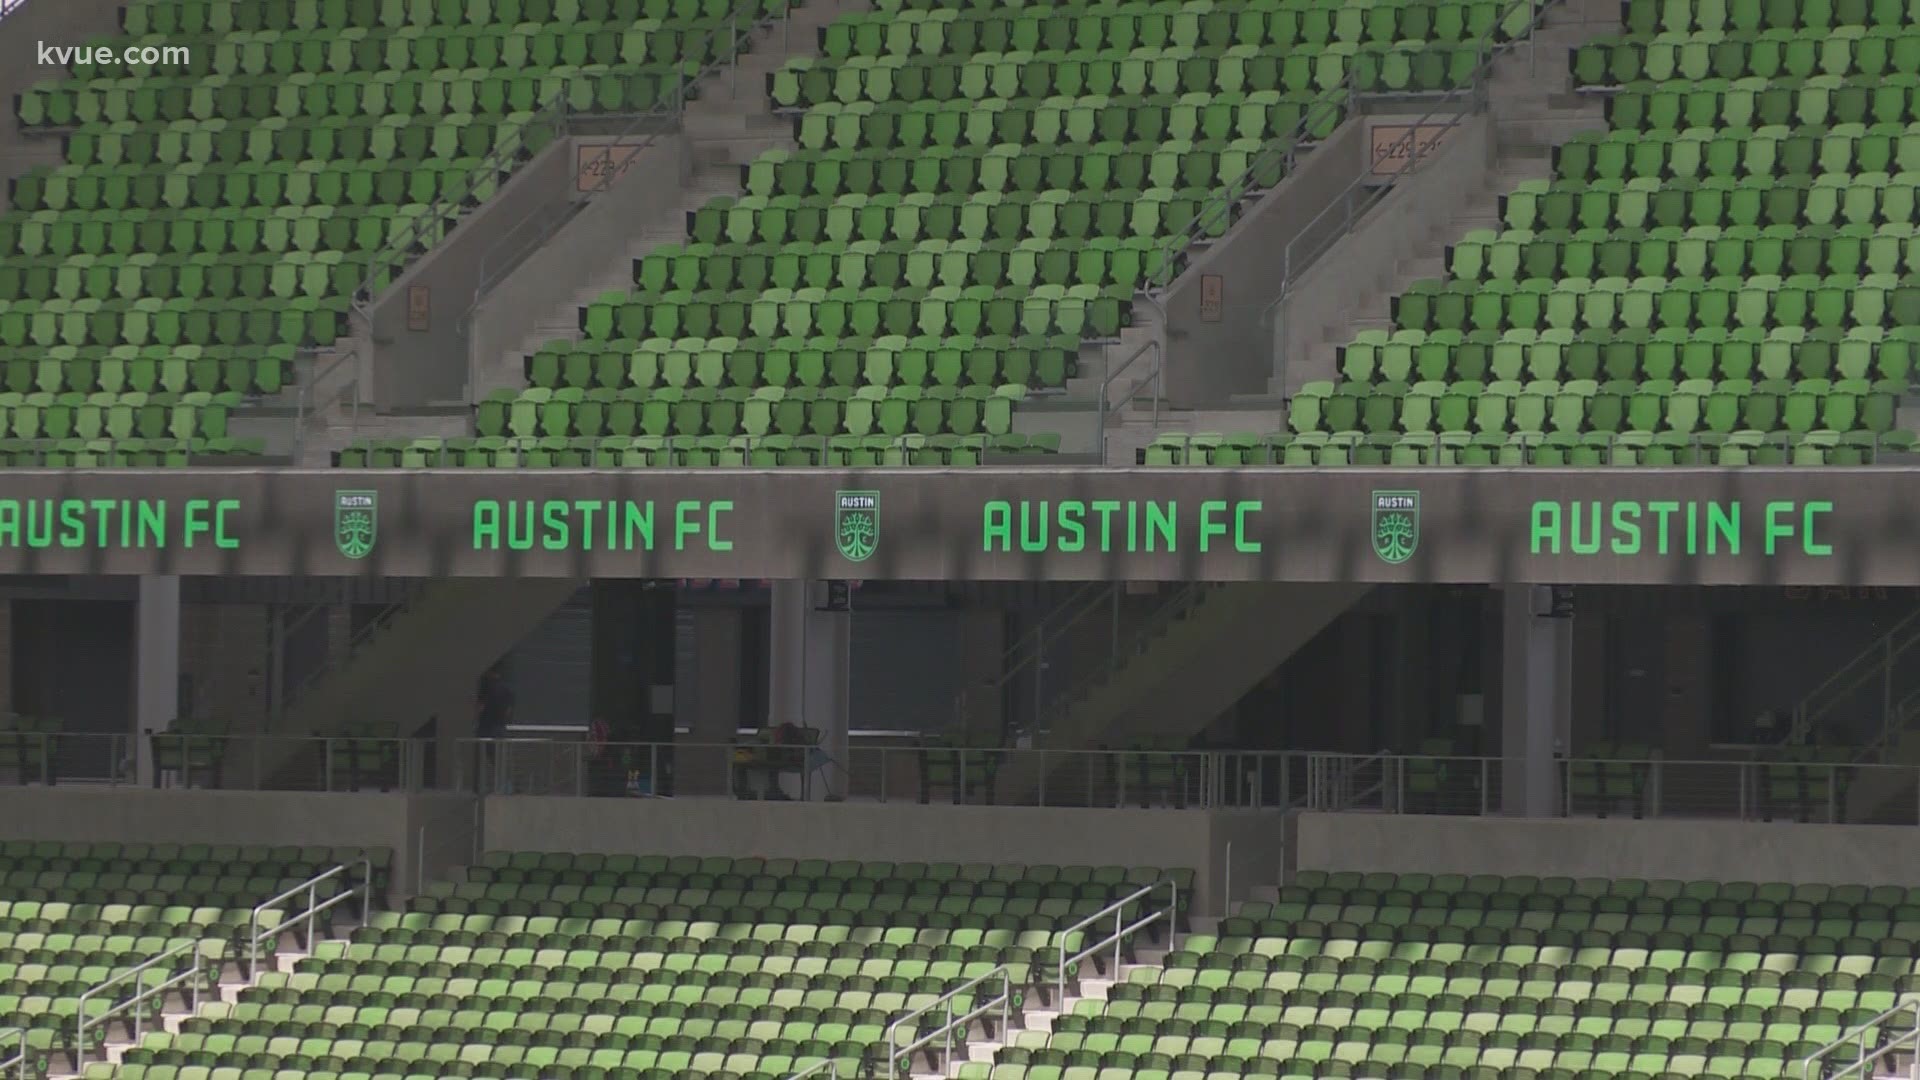 How To Get To Q2 Stadium On Austin Fc Game Days Kvue Com